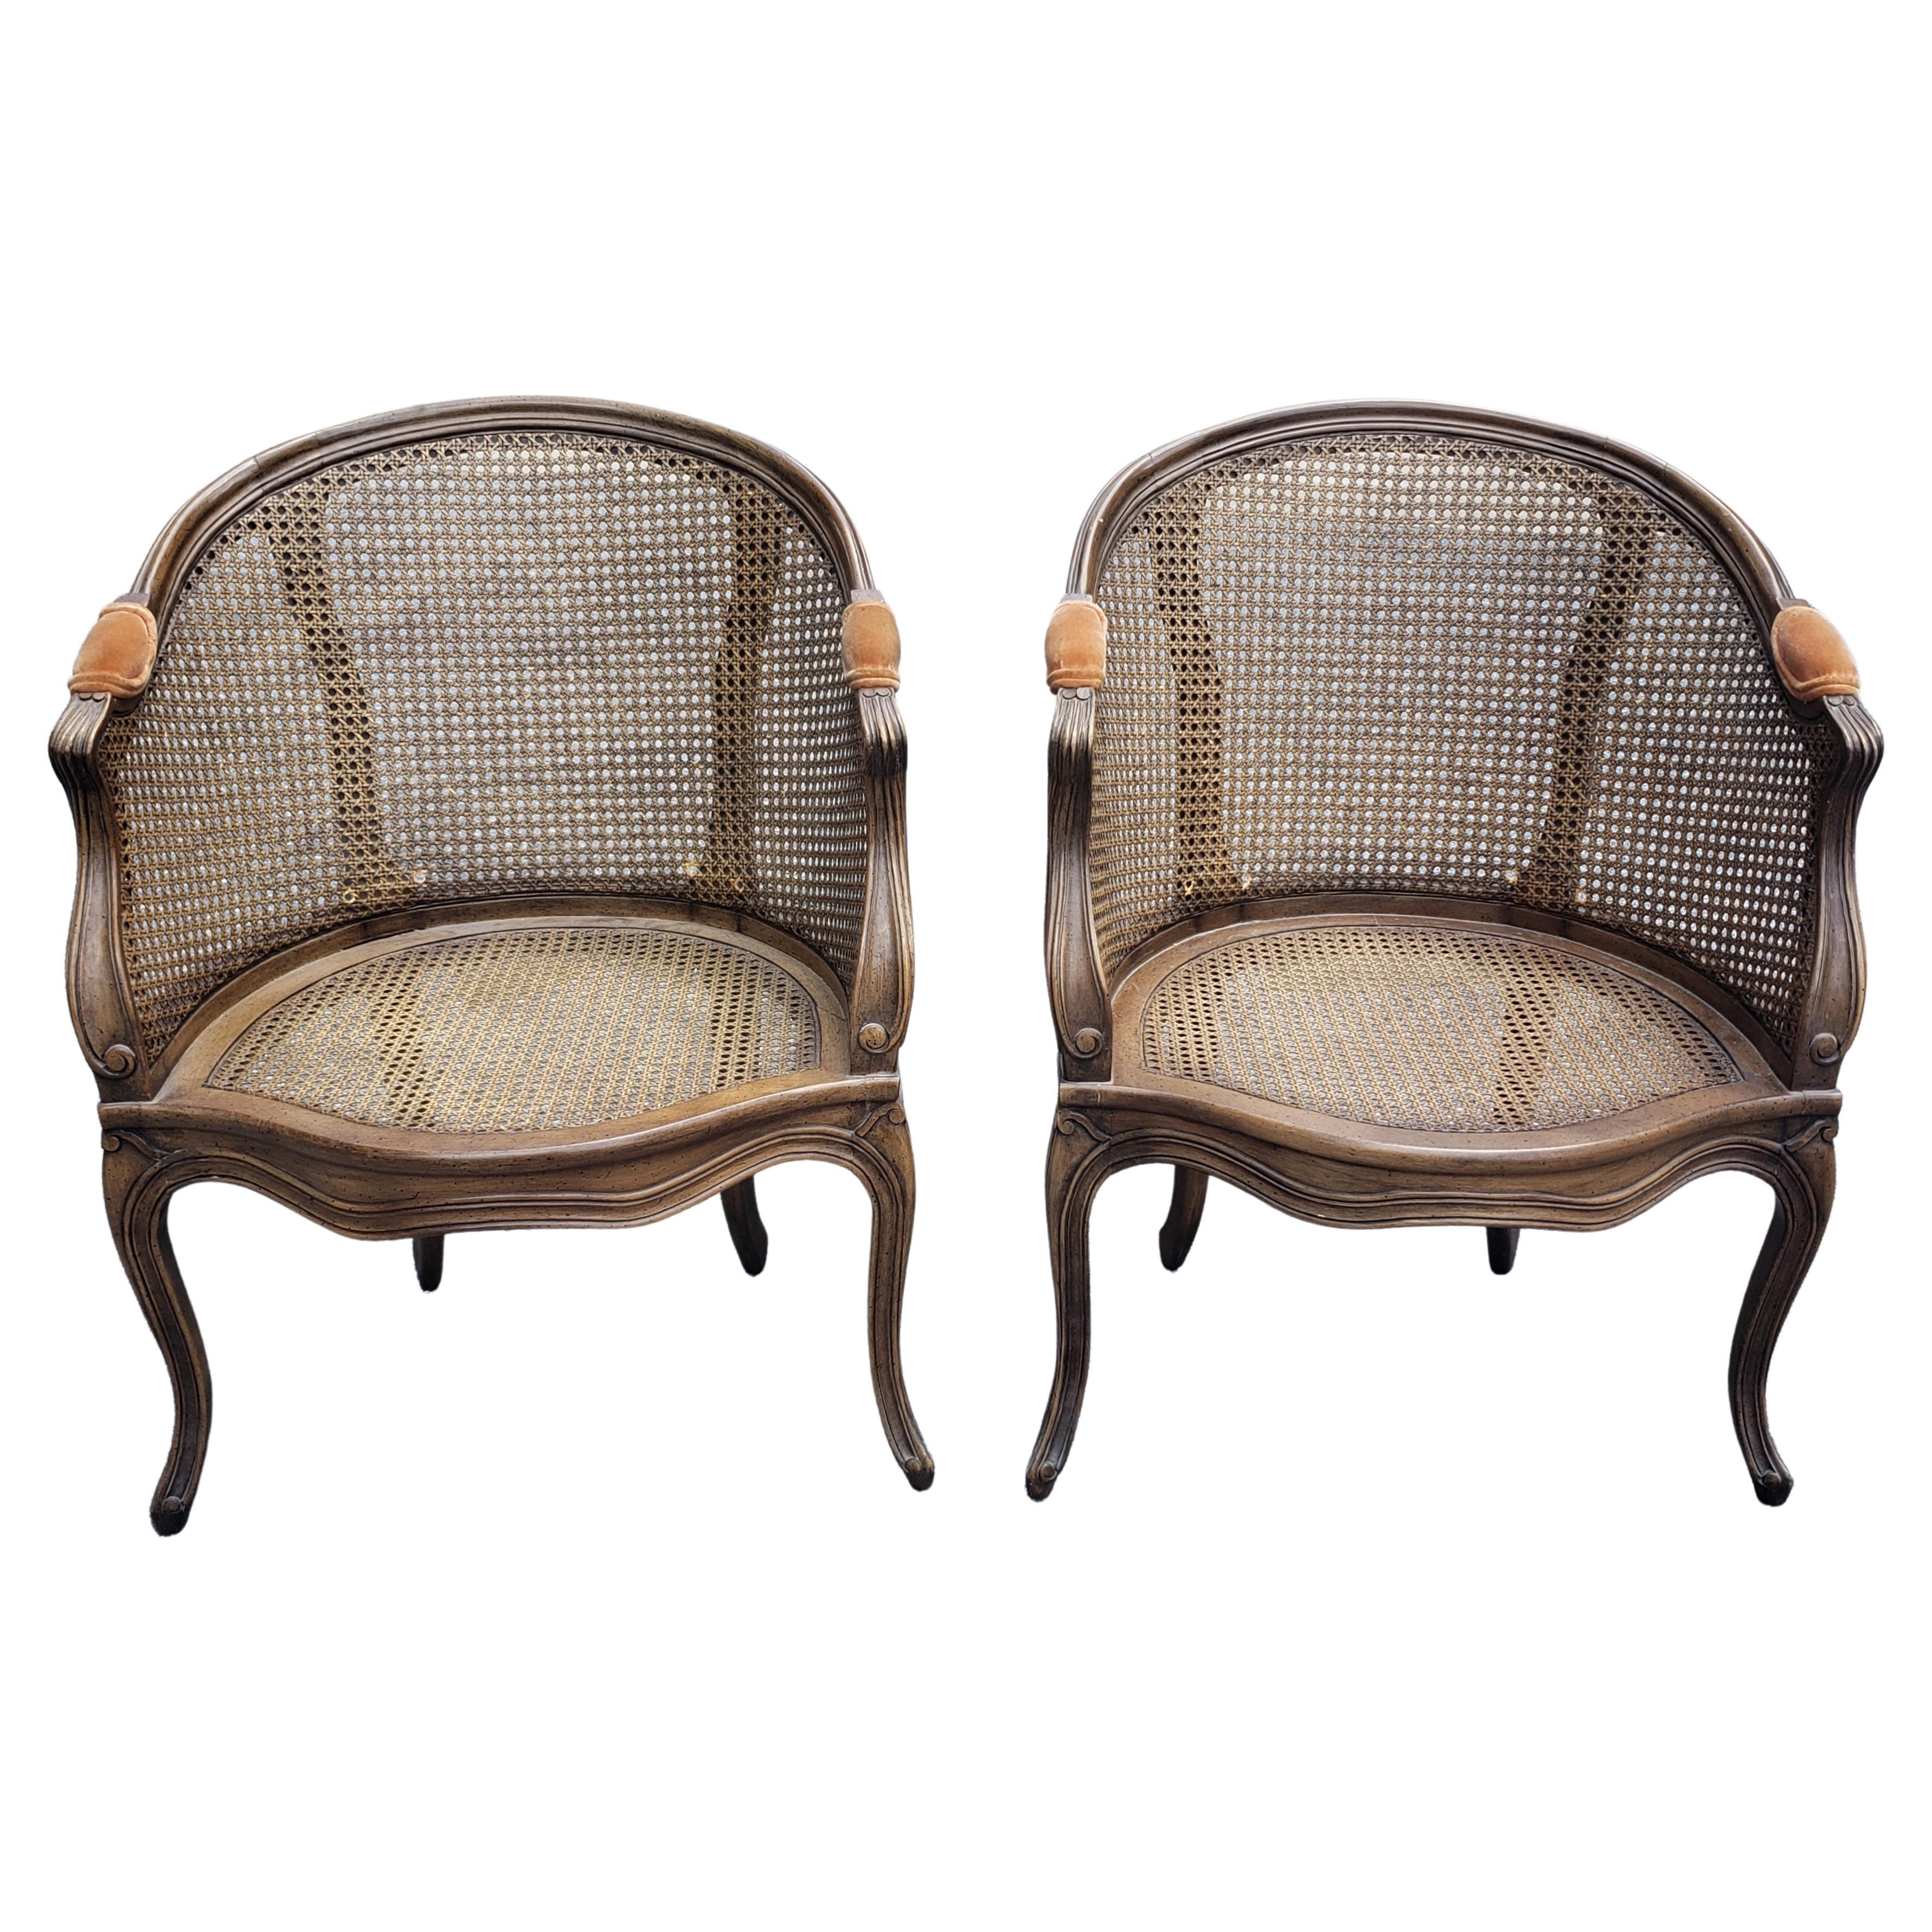 20th Century French Country Walnut and Cane Tufted Upholstered Seat Chairs, a Pair